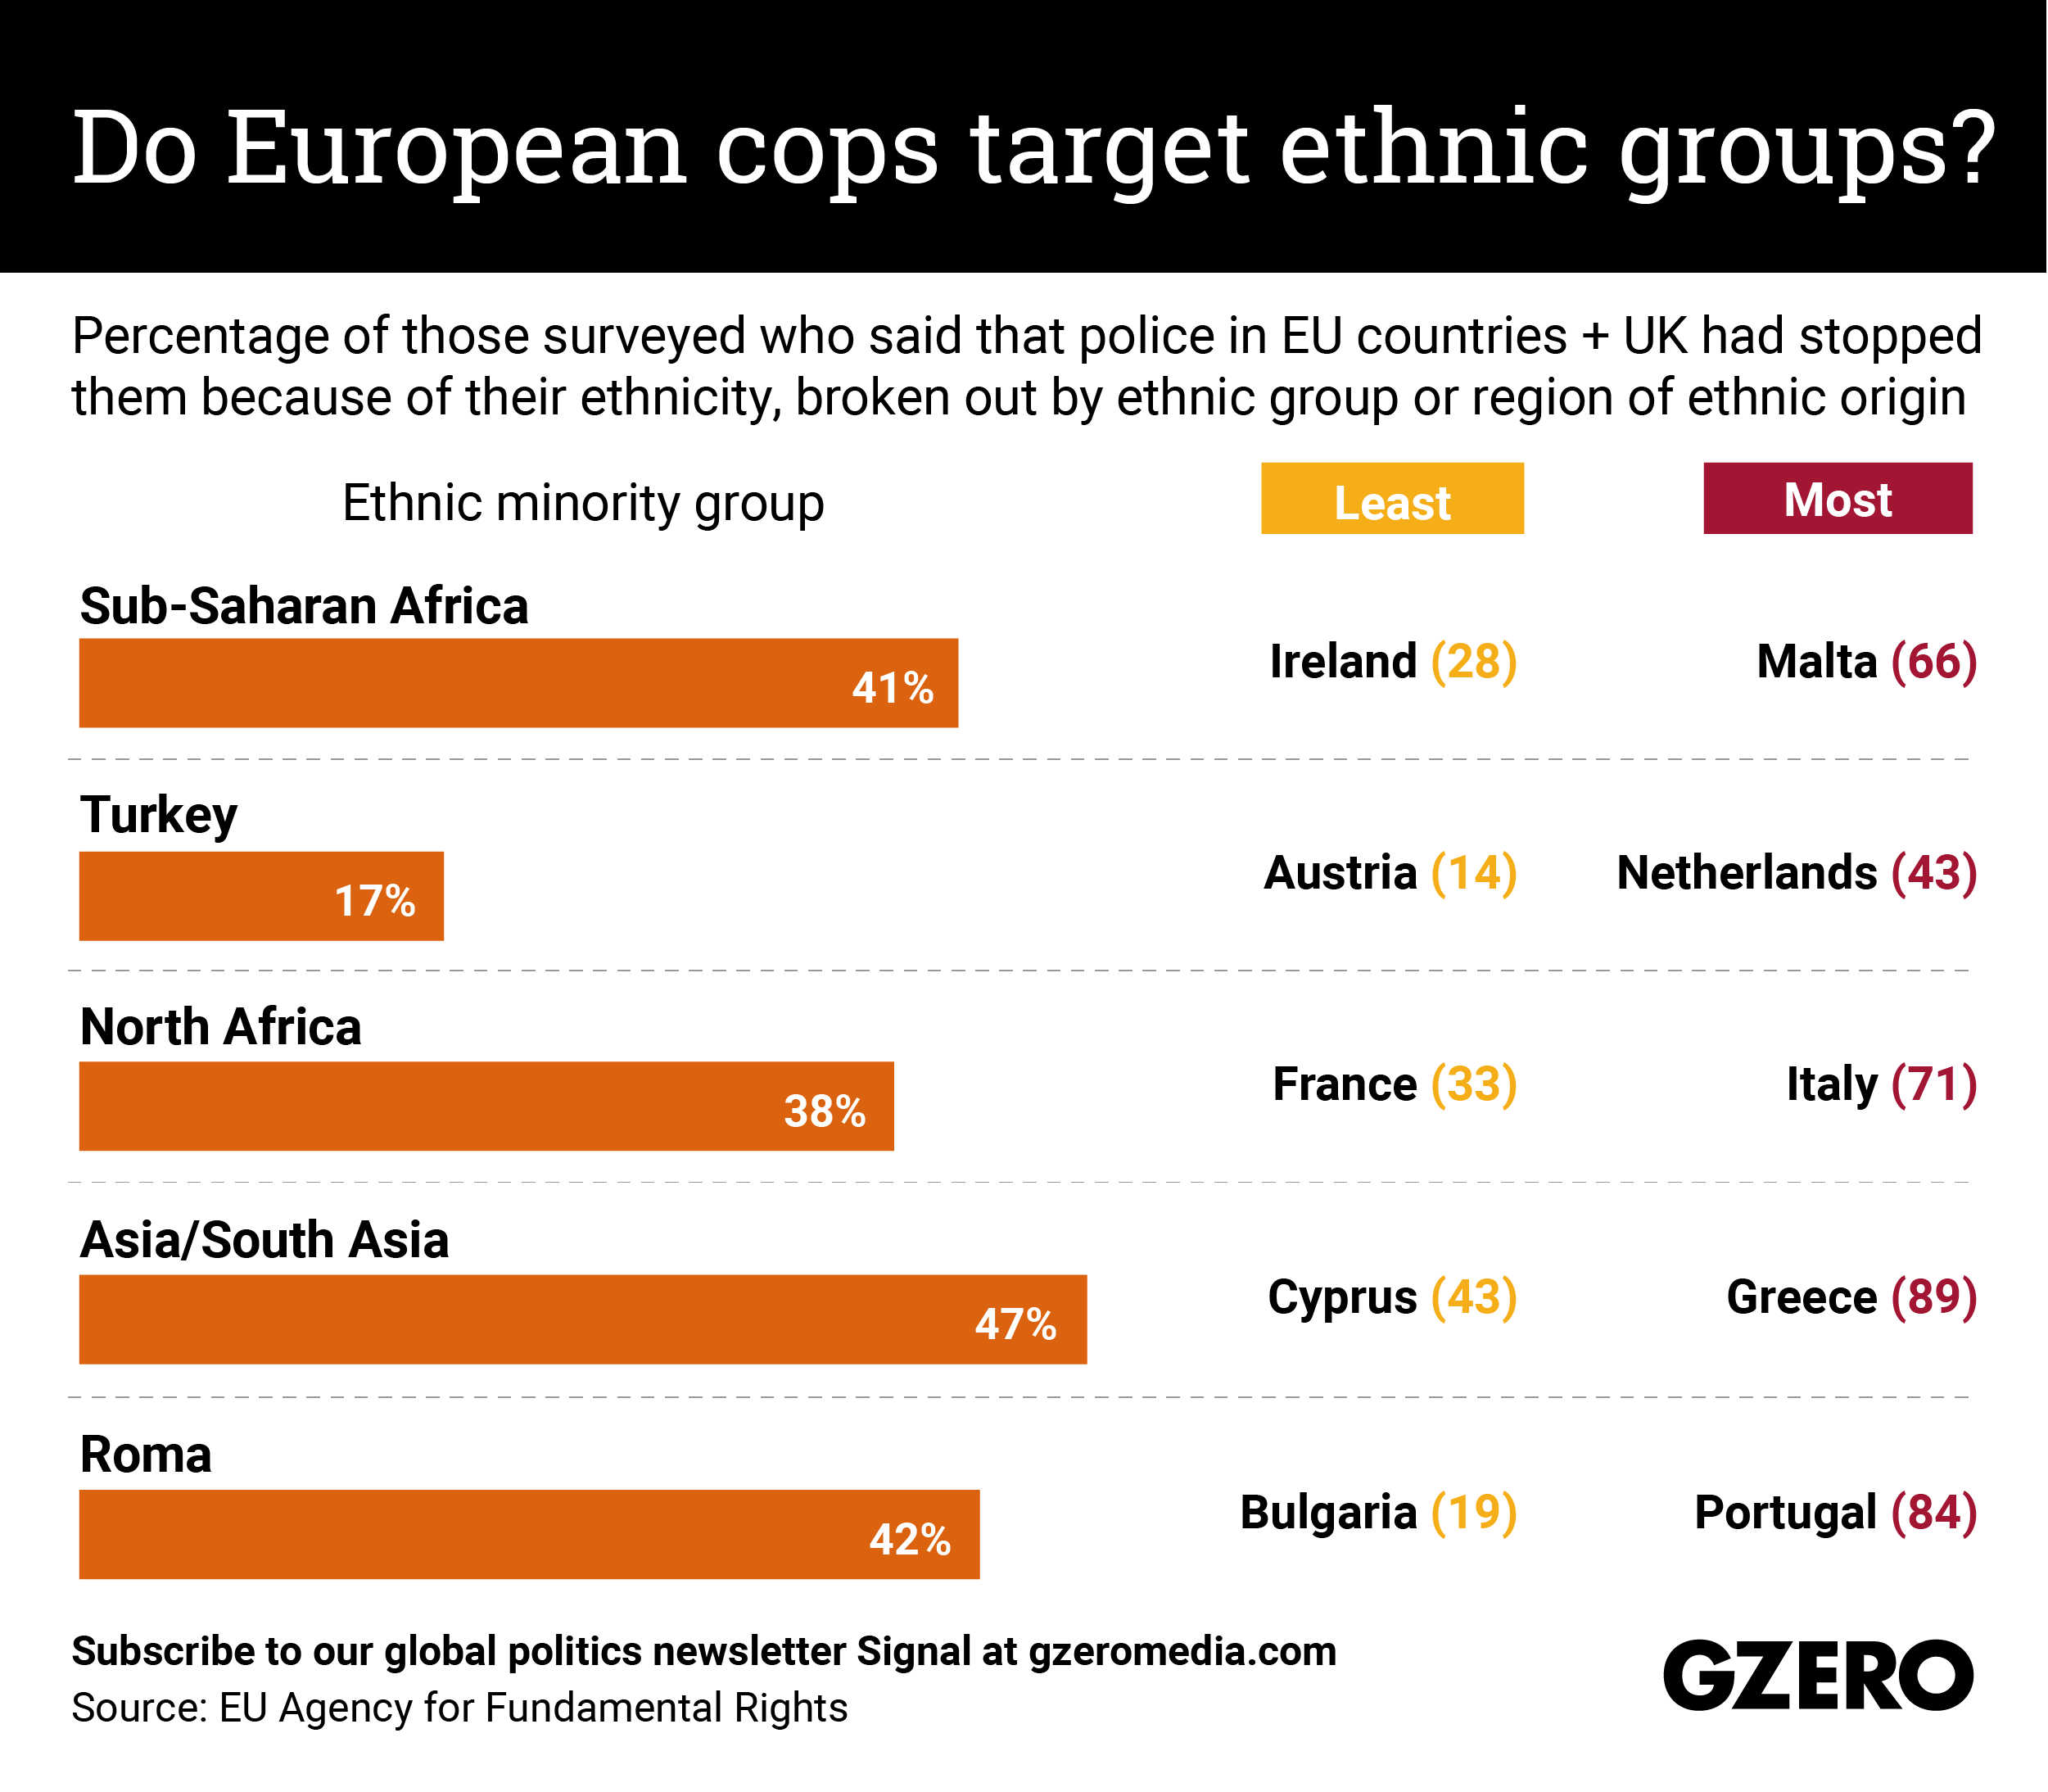 The Graphic Truth: Do European cops target ethnic groups?